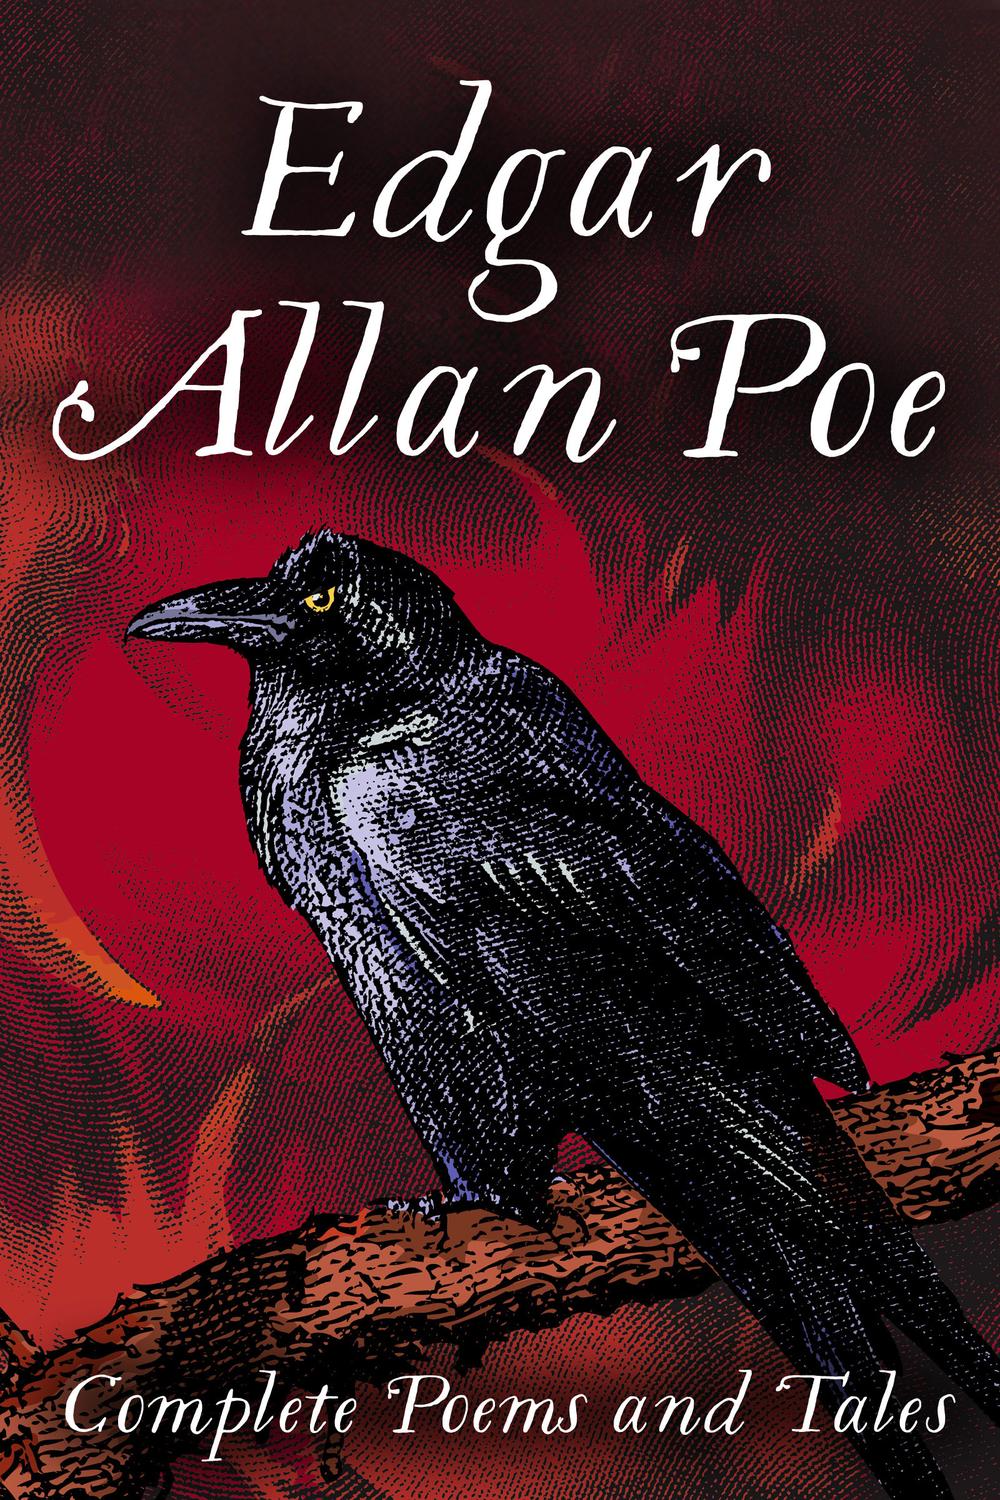 Complete Poems And Tales - Edgar Allan Poe,,